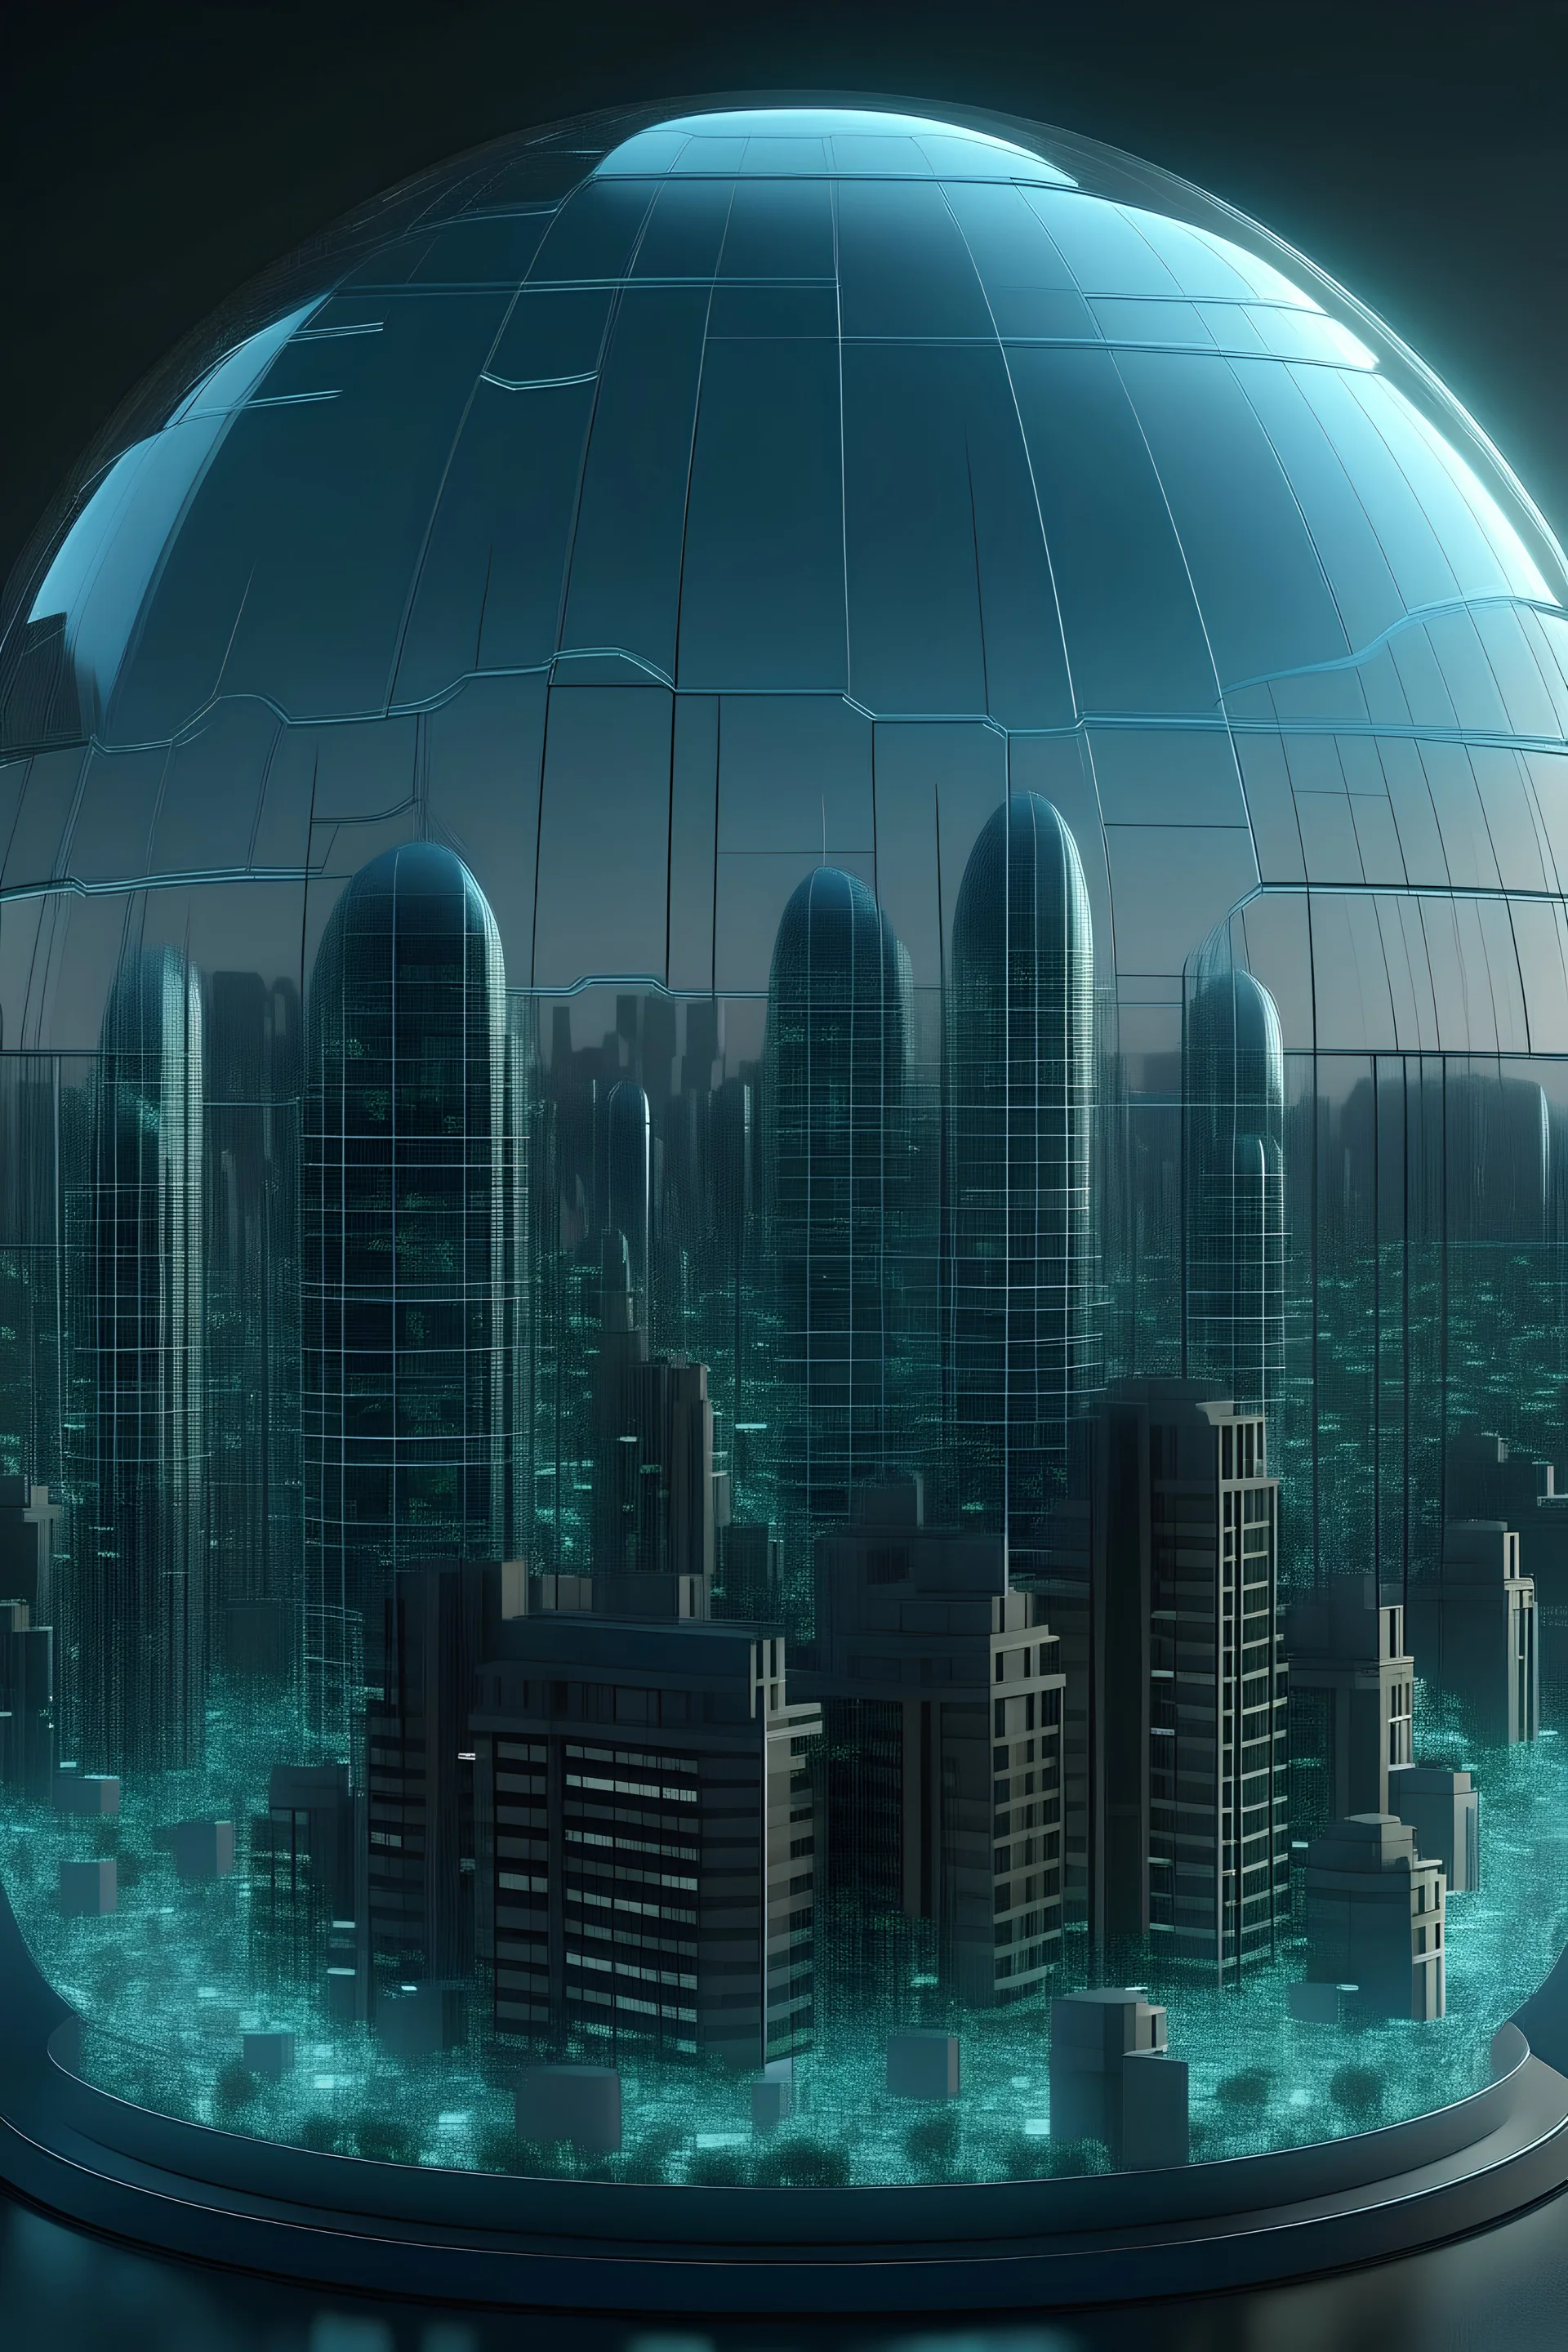 a digital illustration of a city under a glass dome over the top, realistic, detailed, high quality, 4k